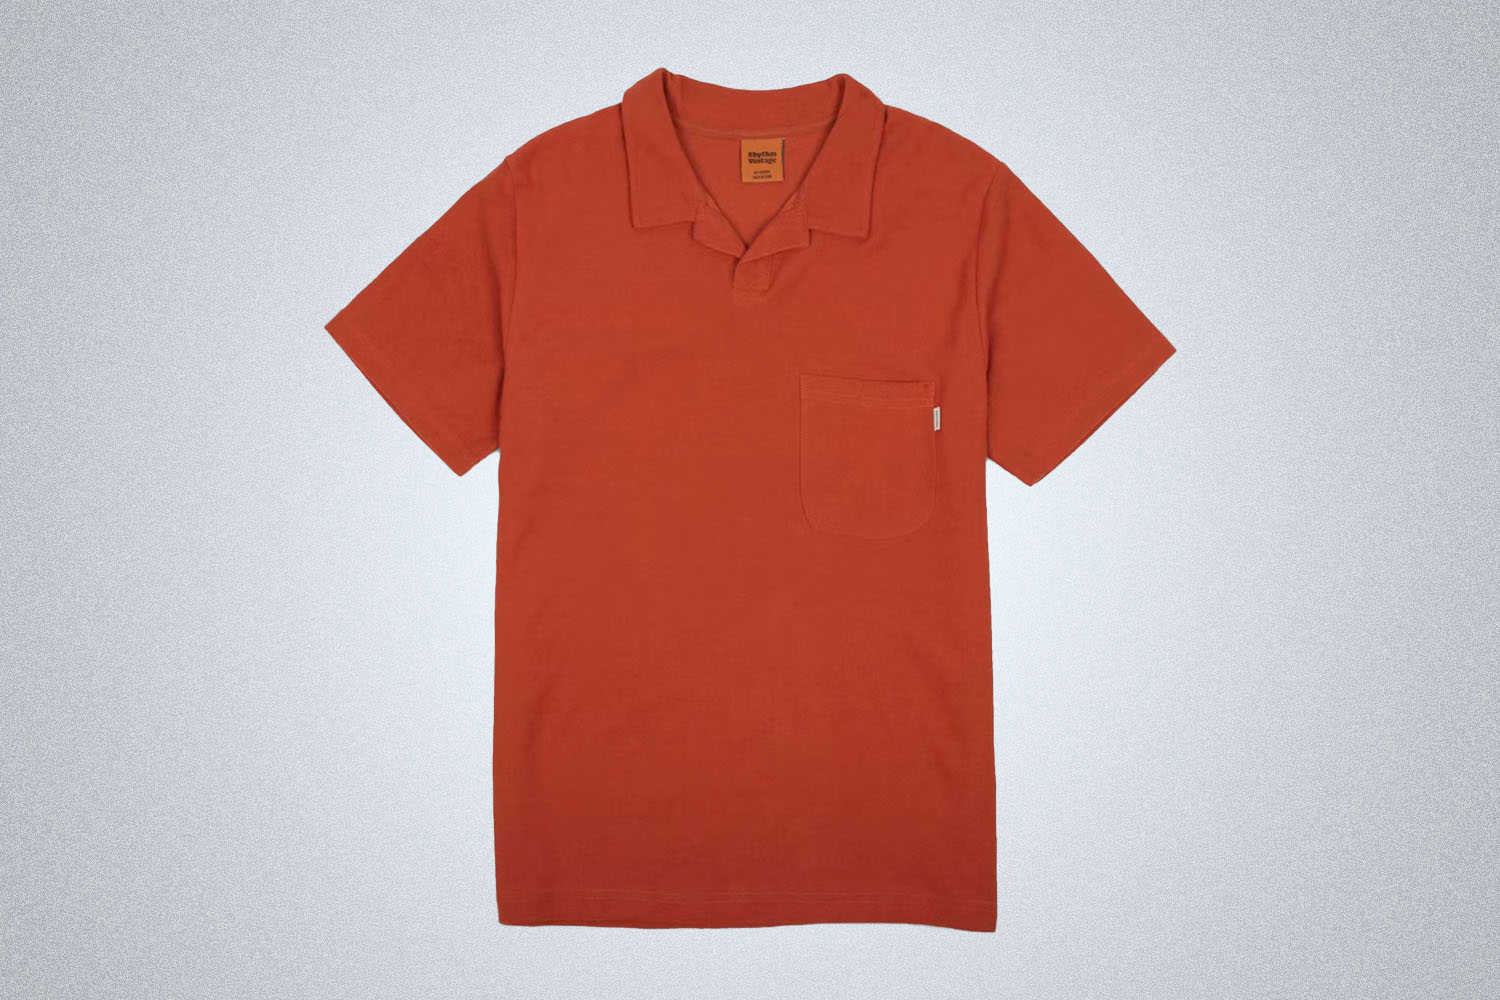 A terracotta red terry polo from Rhythm on a grey background